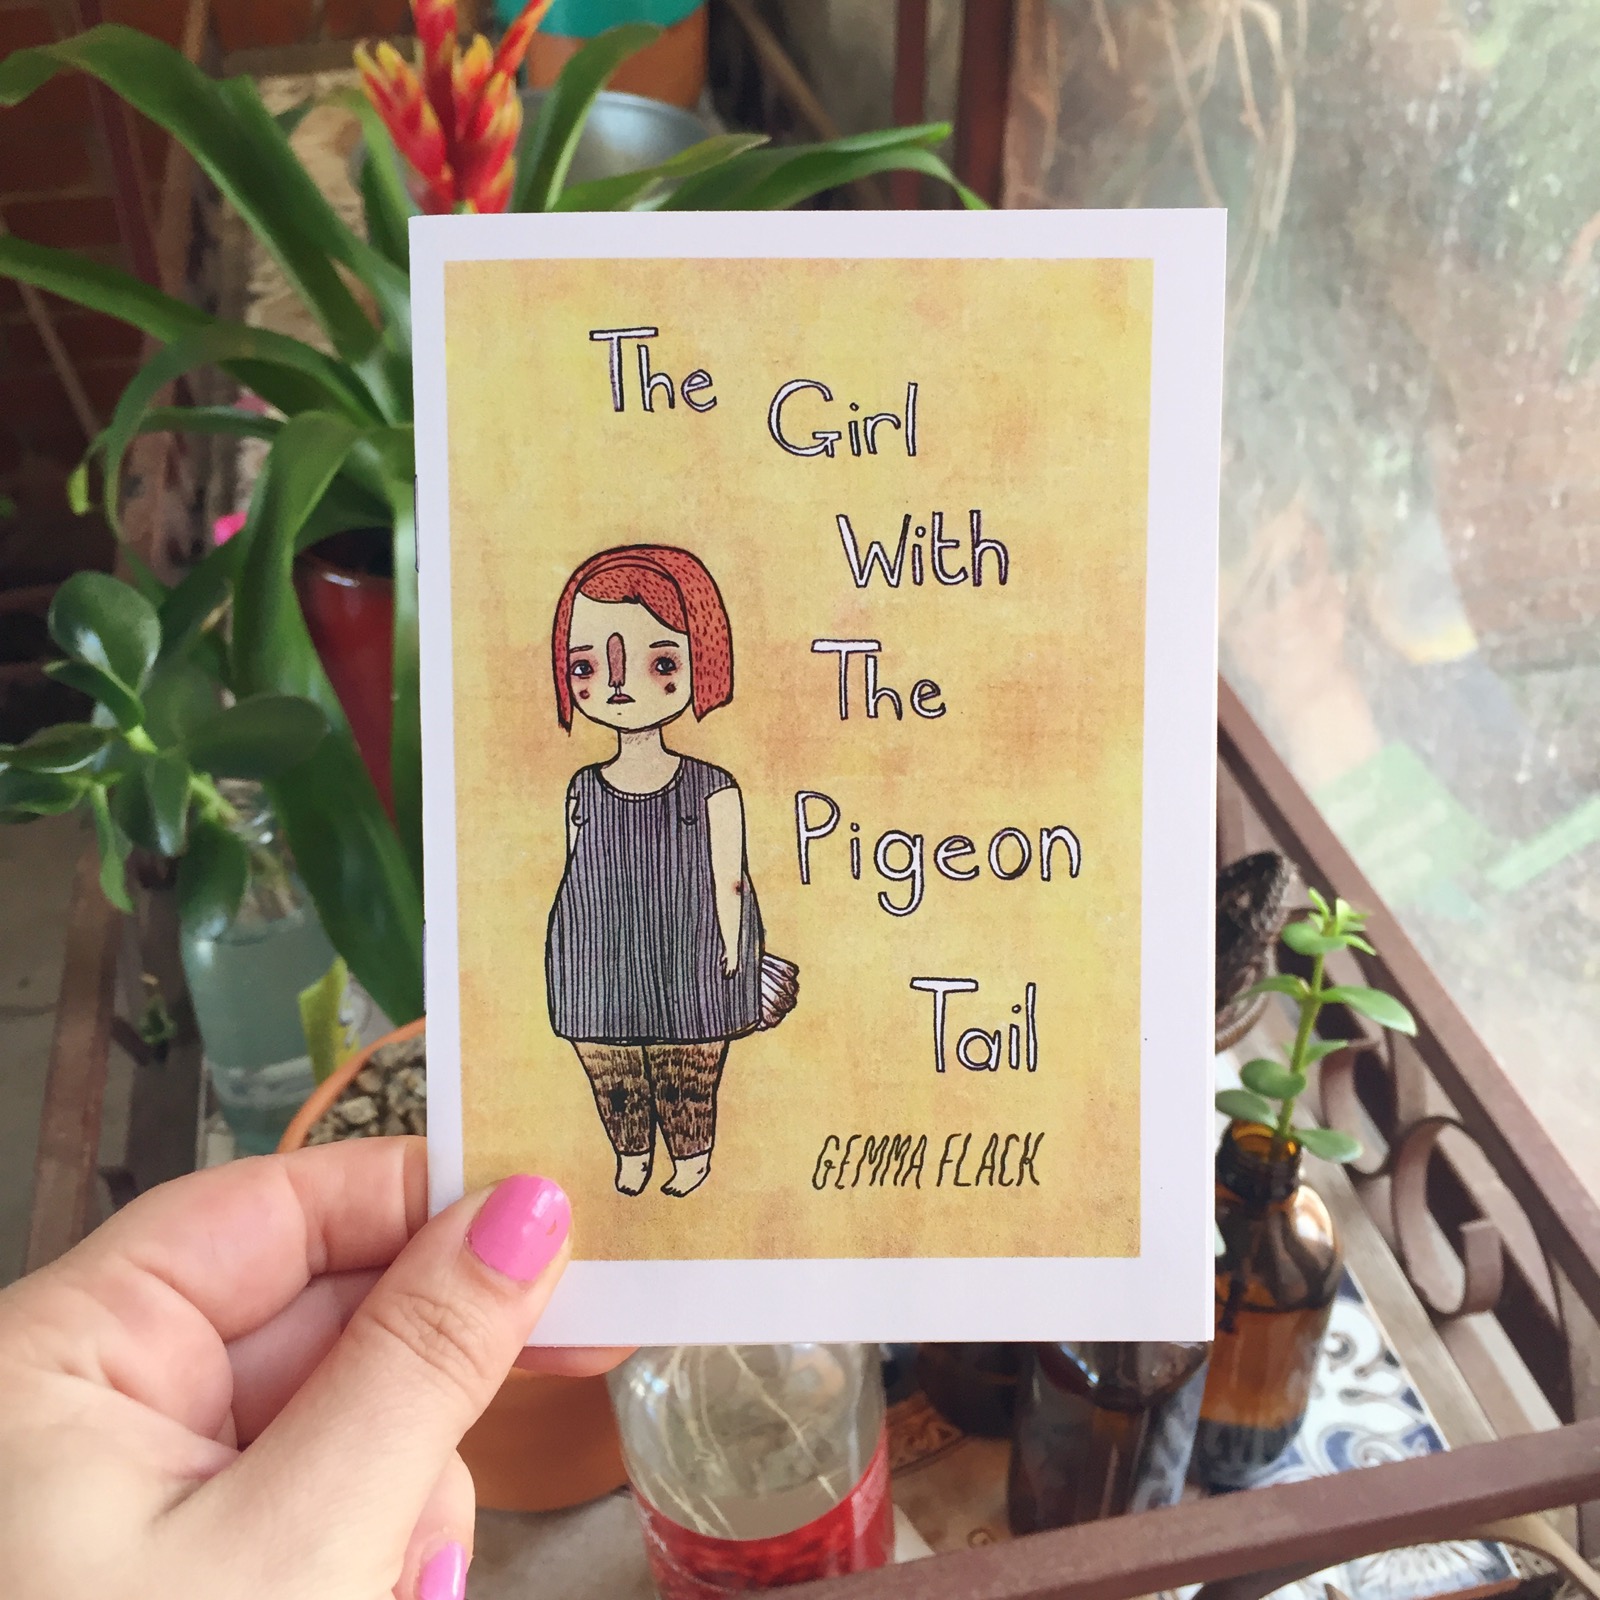 The Girl With The Pigeon Tail